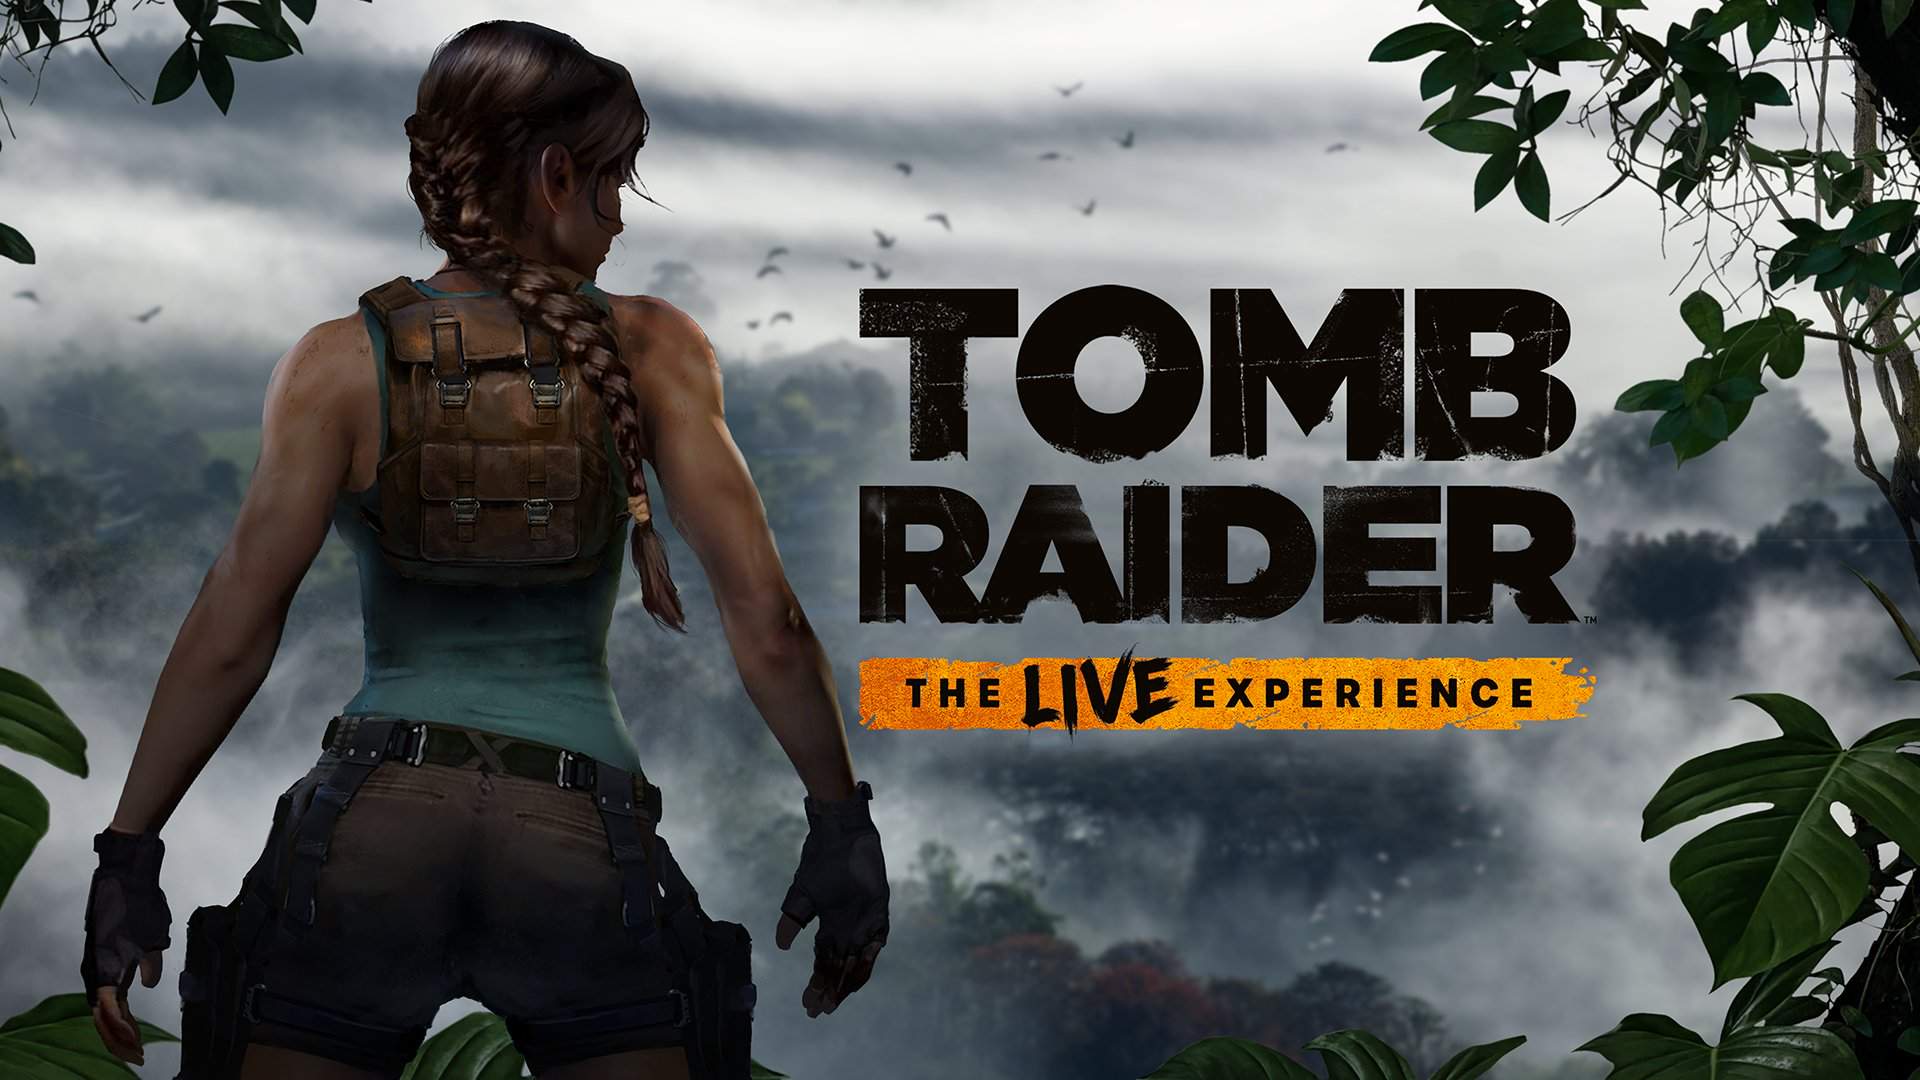 Lara Croft surveys her next adventure with the Tomb Raider: The Live Experience logo next to her.